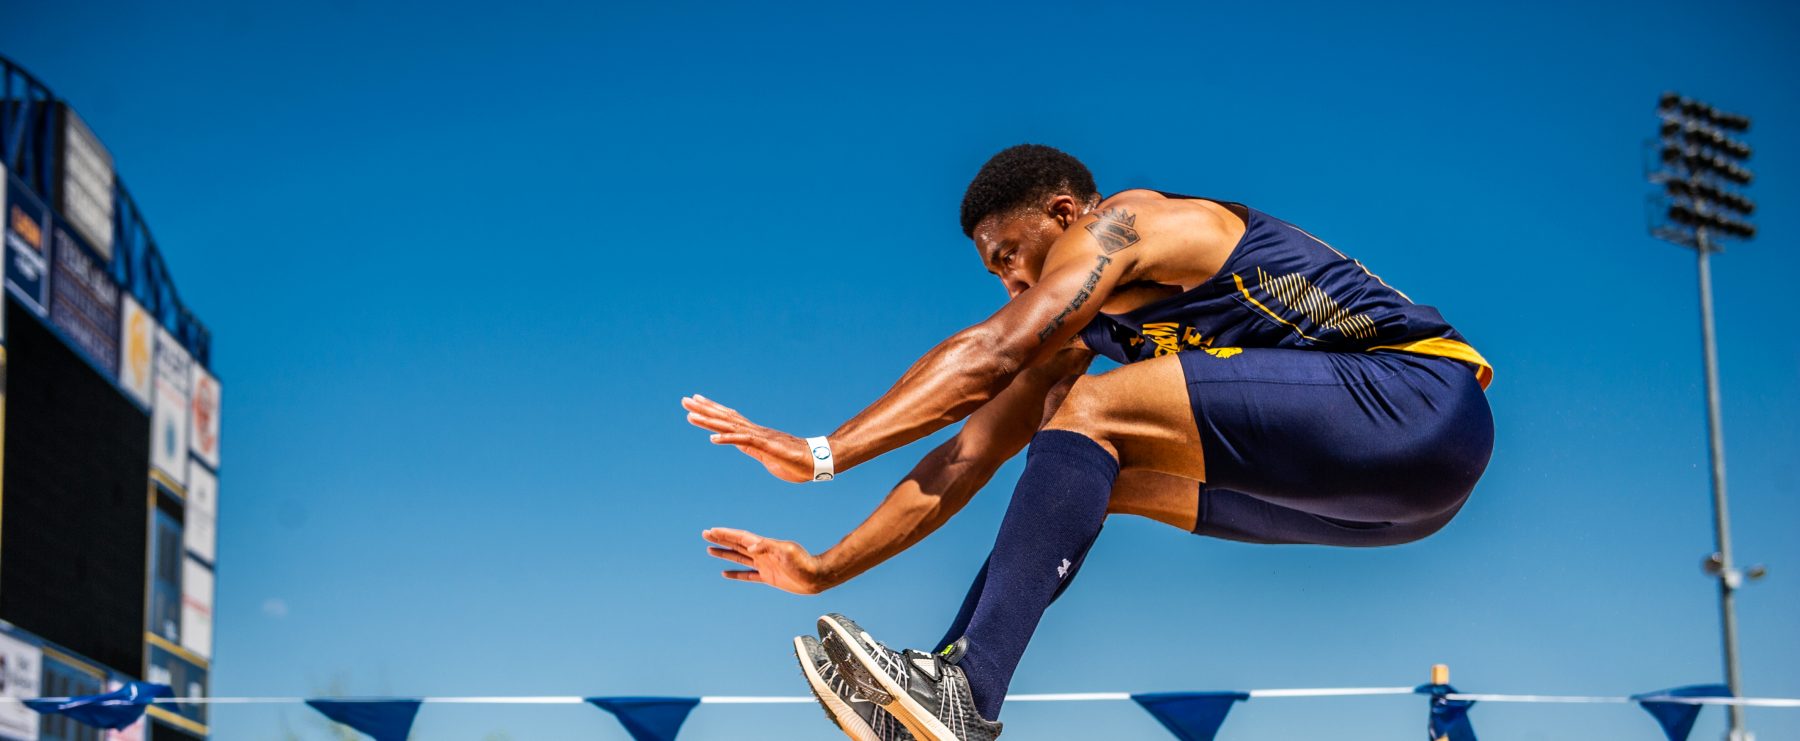 A track and field athlete is depicted in mid-air over a long-jump sand pit.